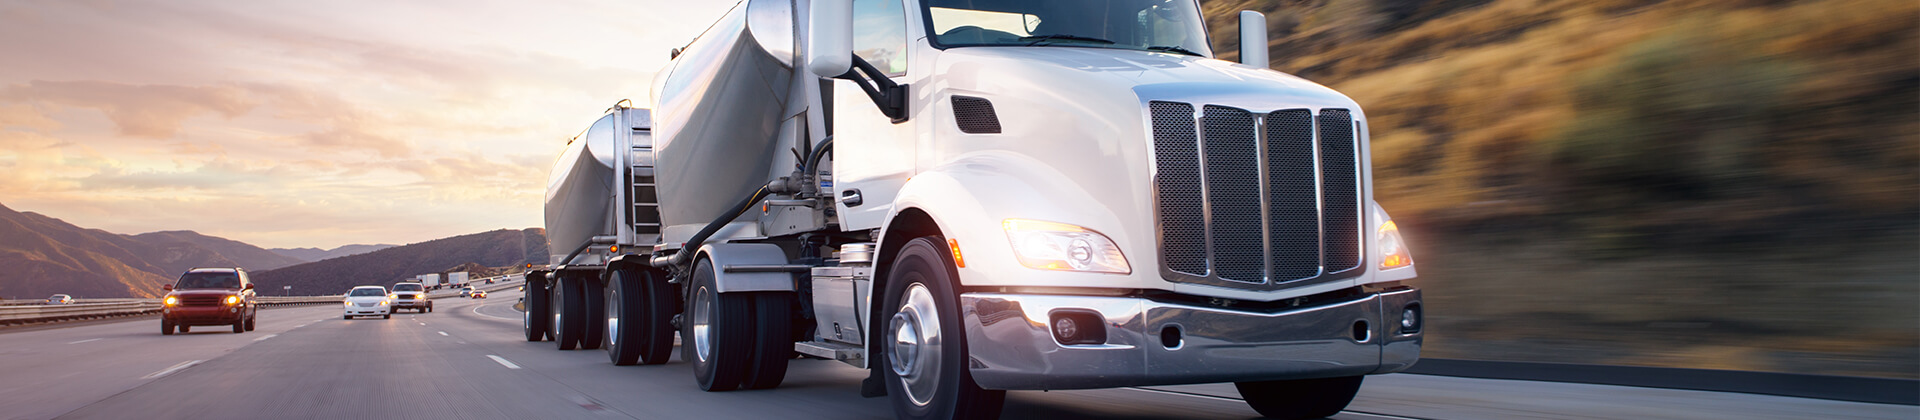 Local truck driving jobs in baltimore md